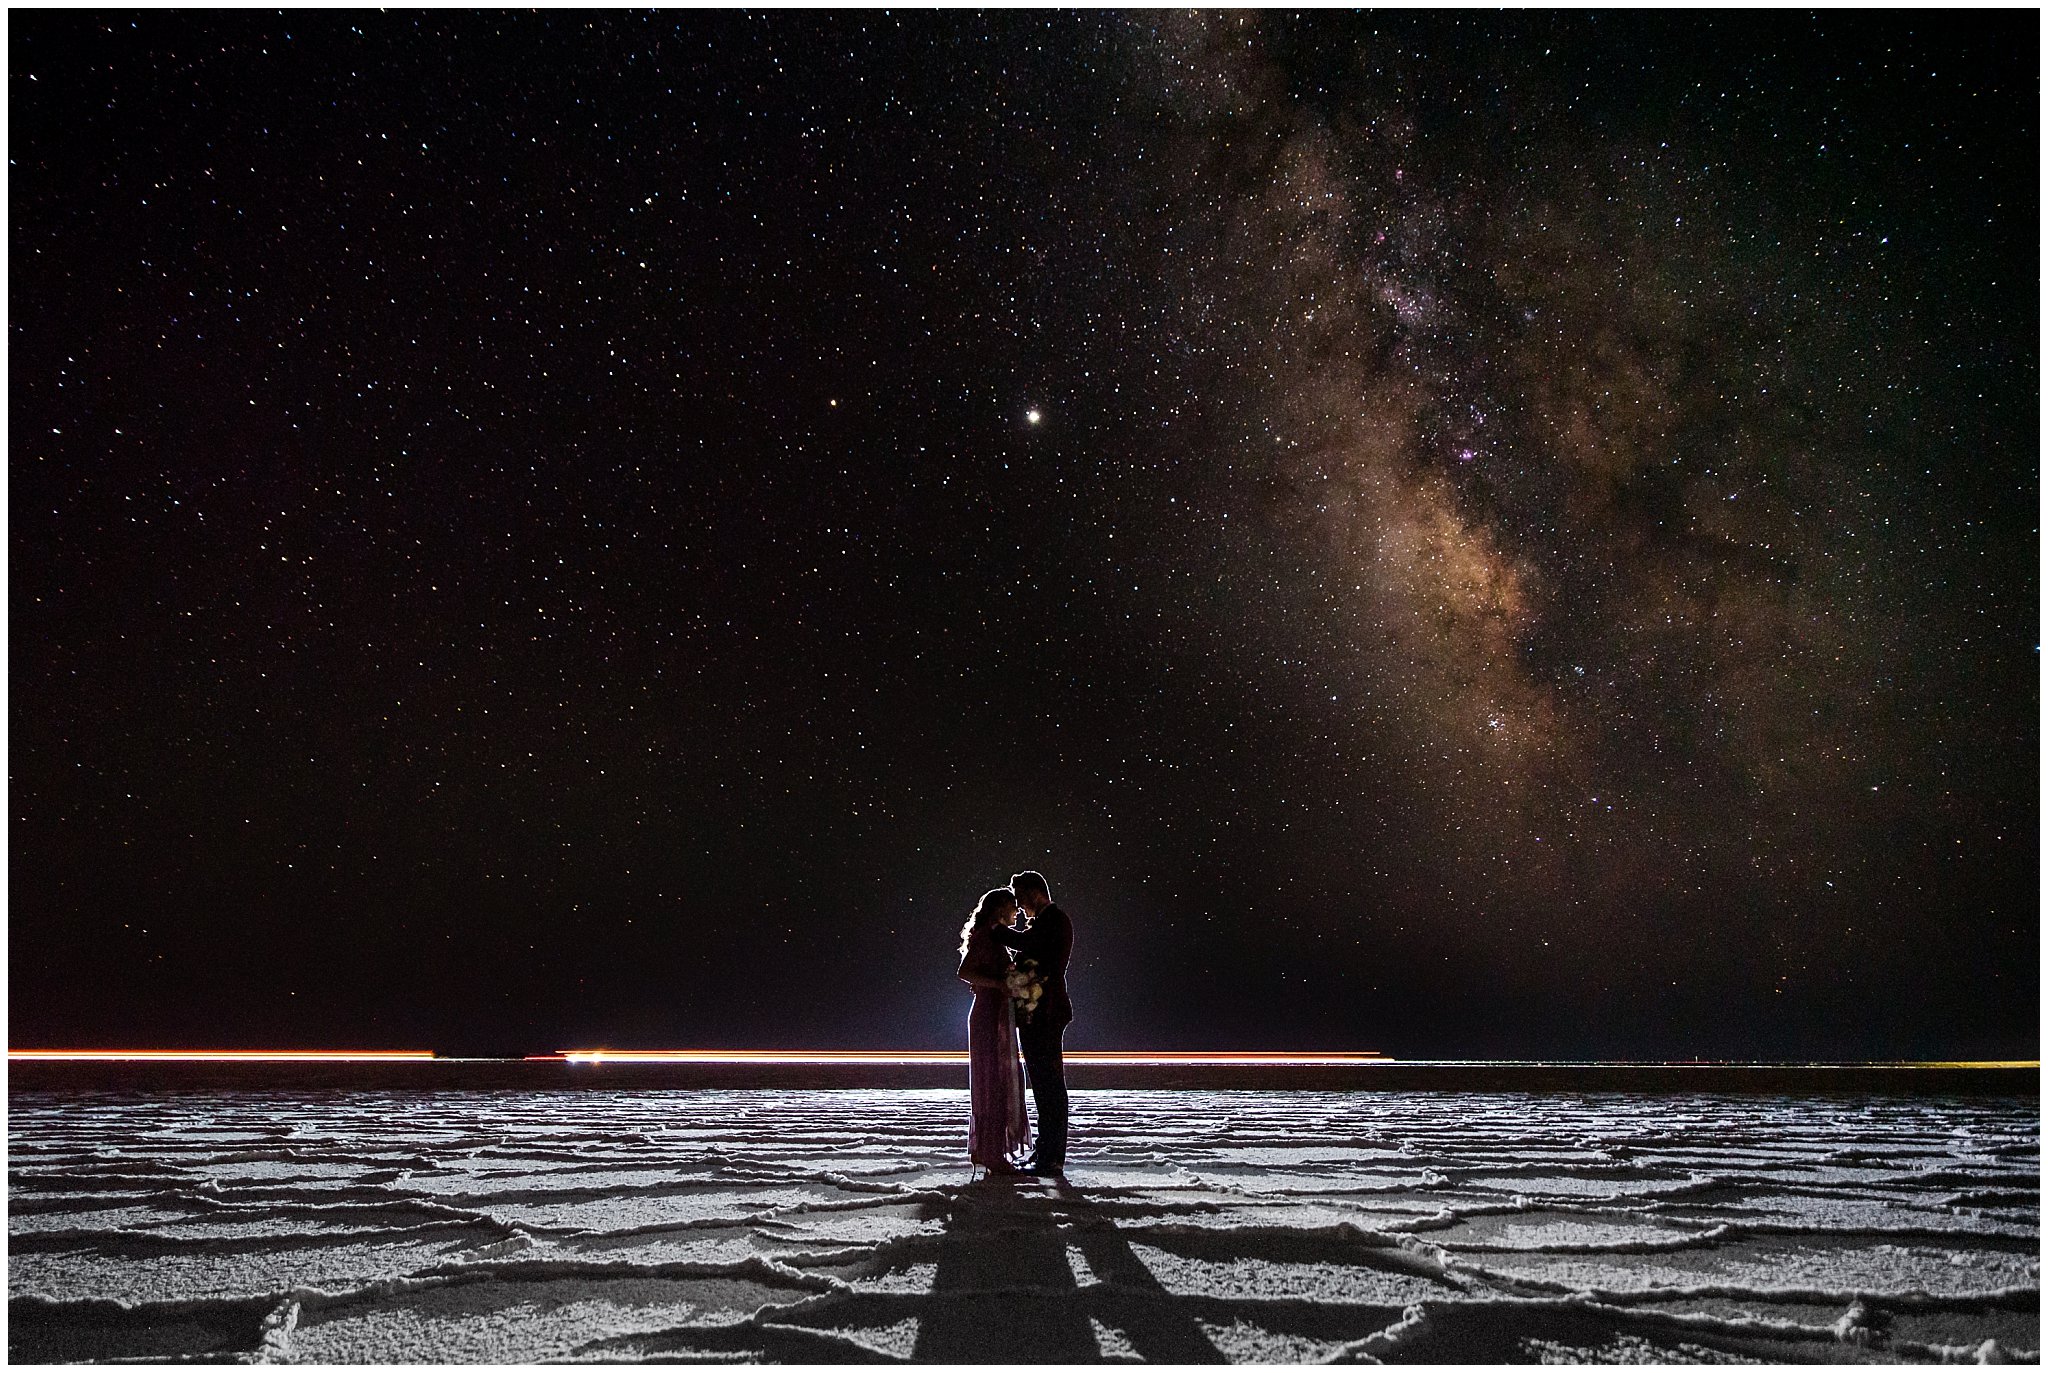 Astrophotography with couple wearing a dusty rose dress and burgundy suit with white and pink bouquet at the Bonneville Salt Flats Milky Way Anniversary Session | Jessie and Dallin Photography